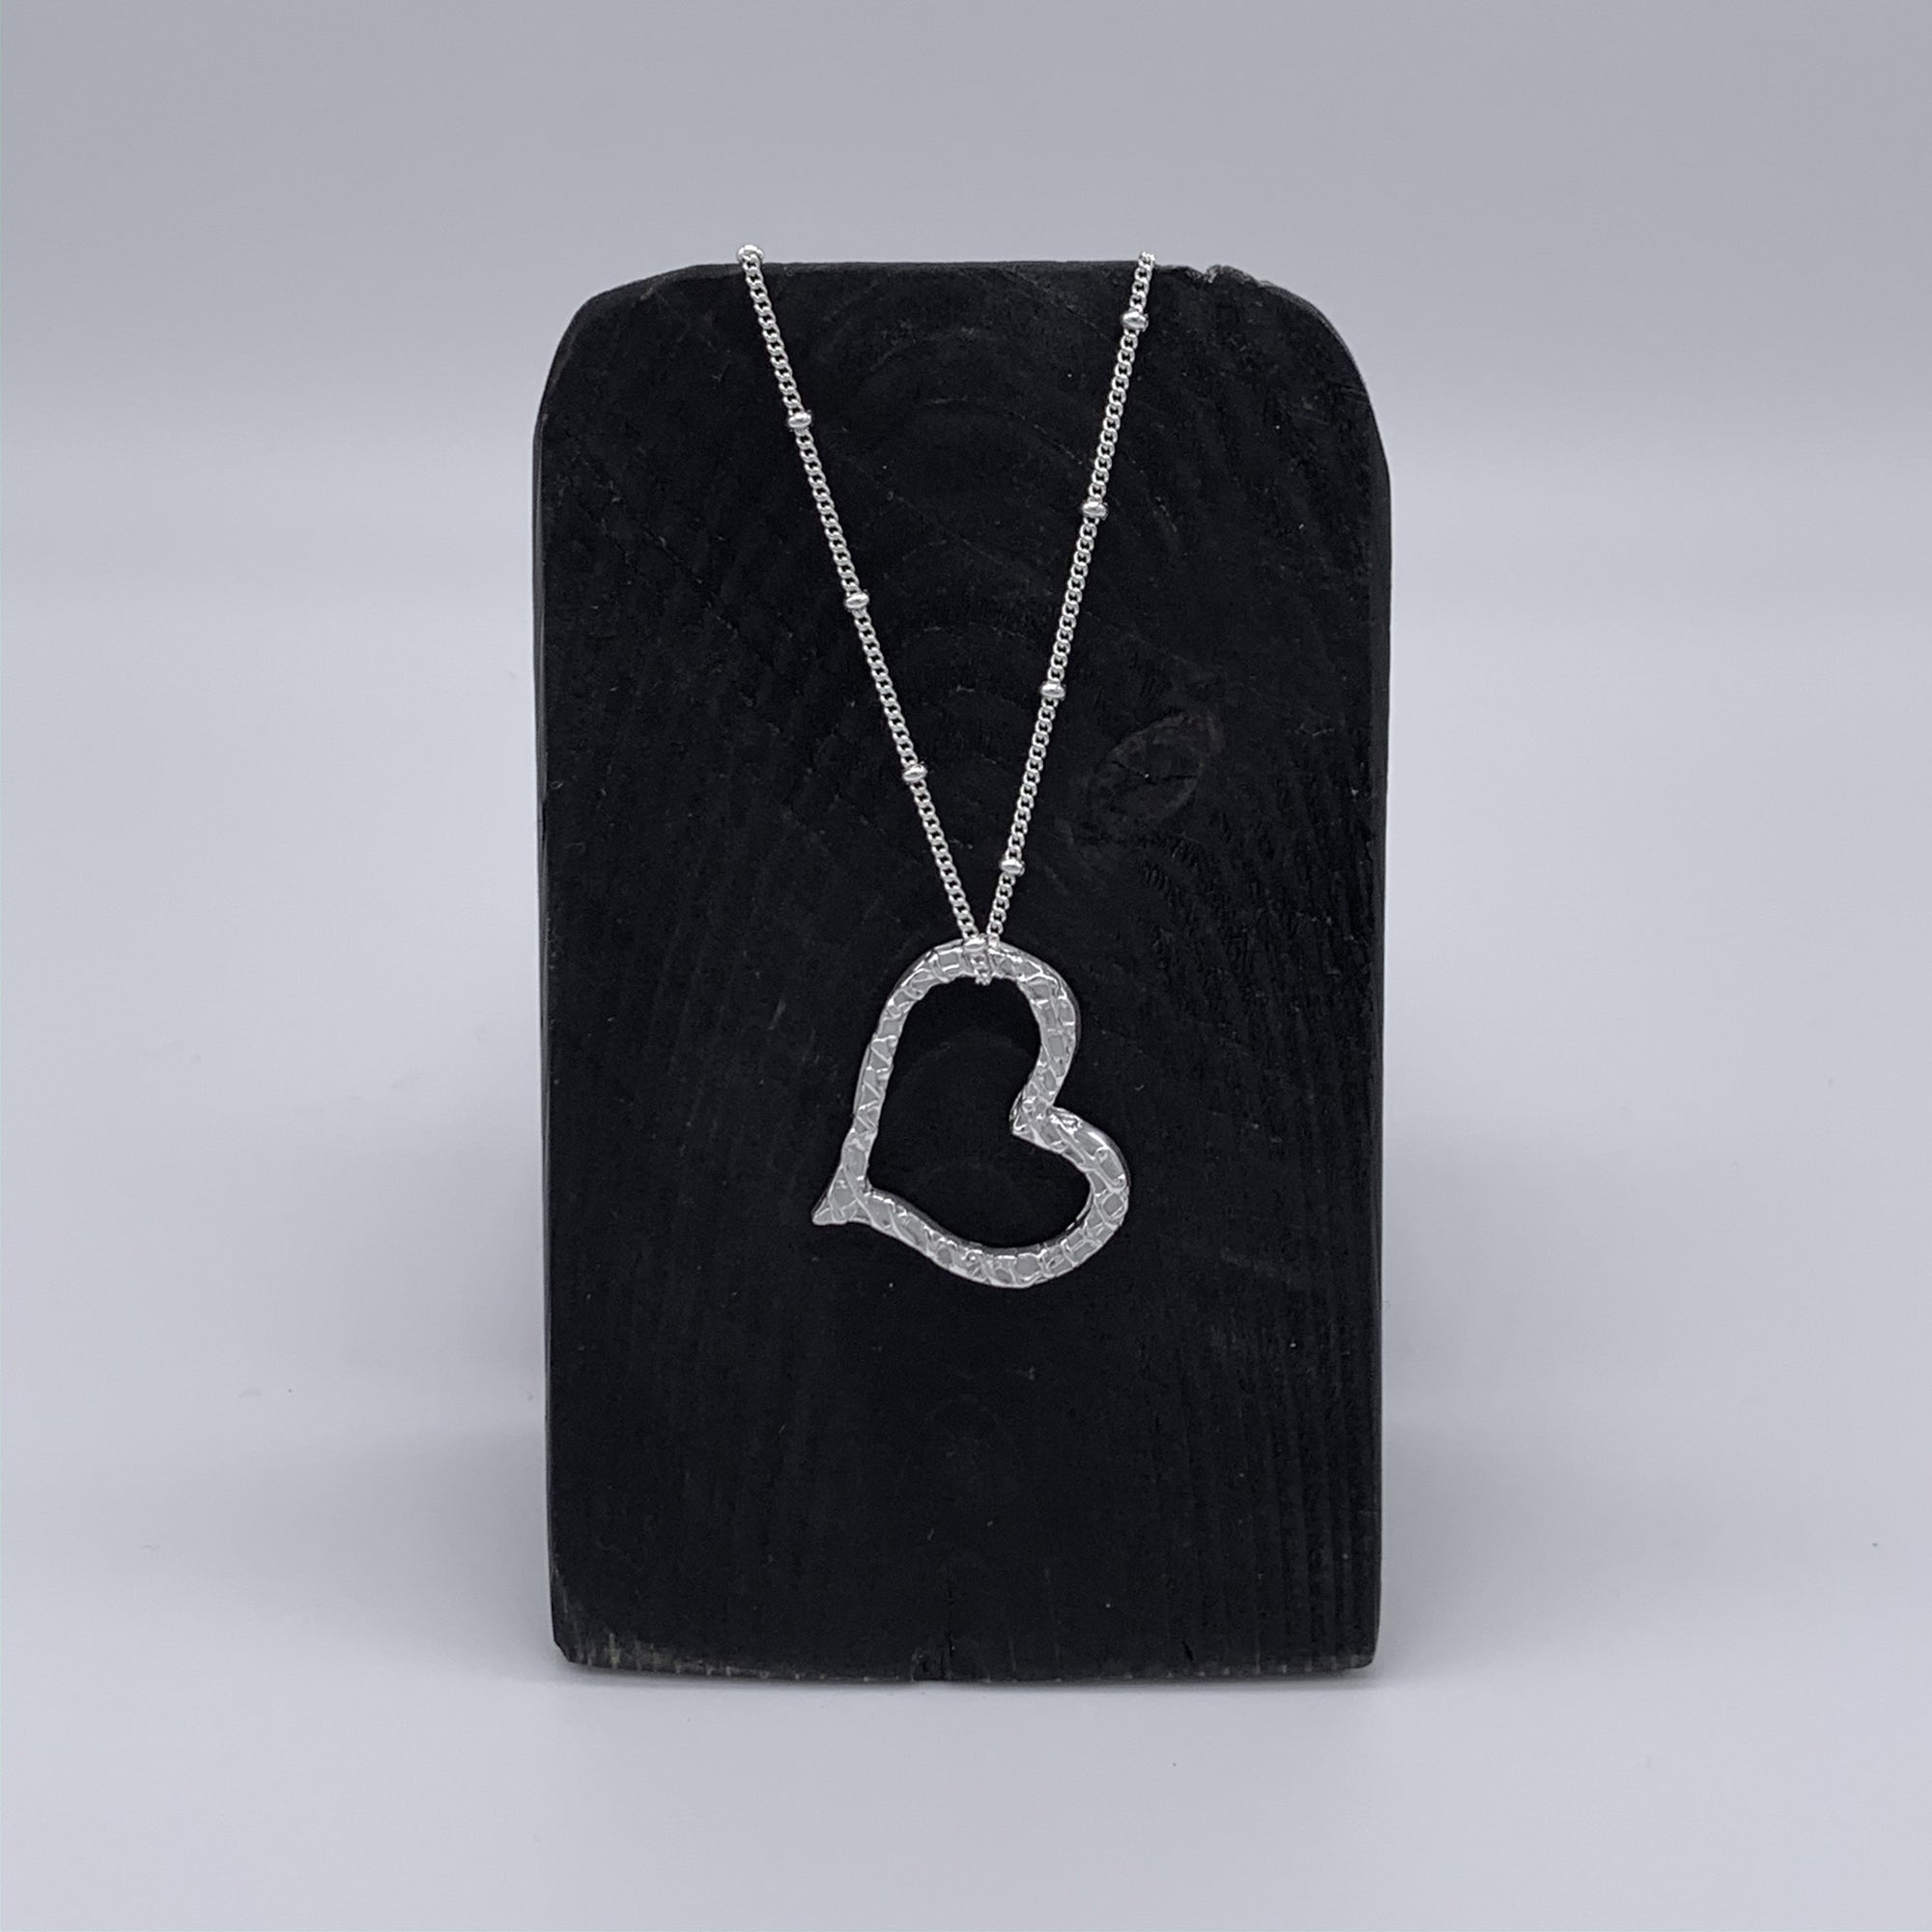 "Whimsy" - Journey Heart Necklace